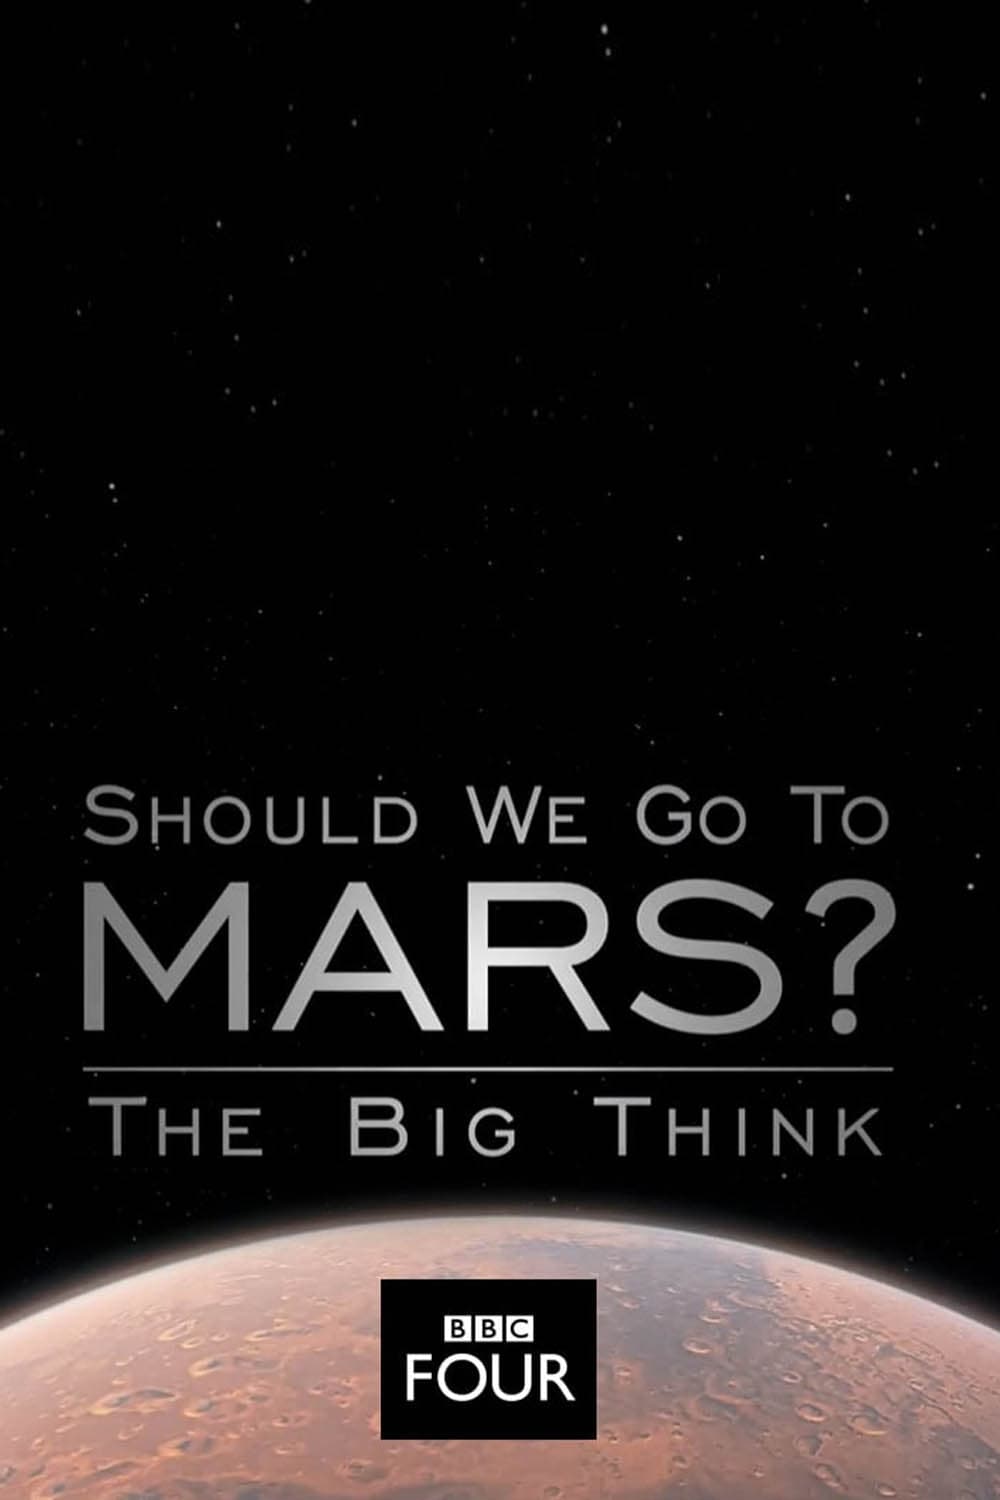 The Big Think: Should We Go to Mars?